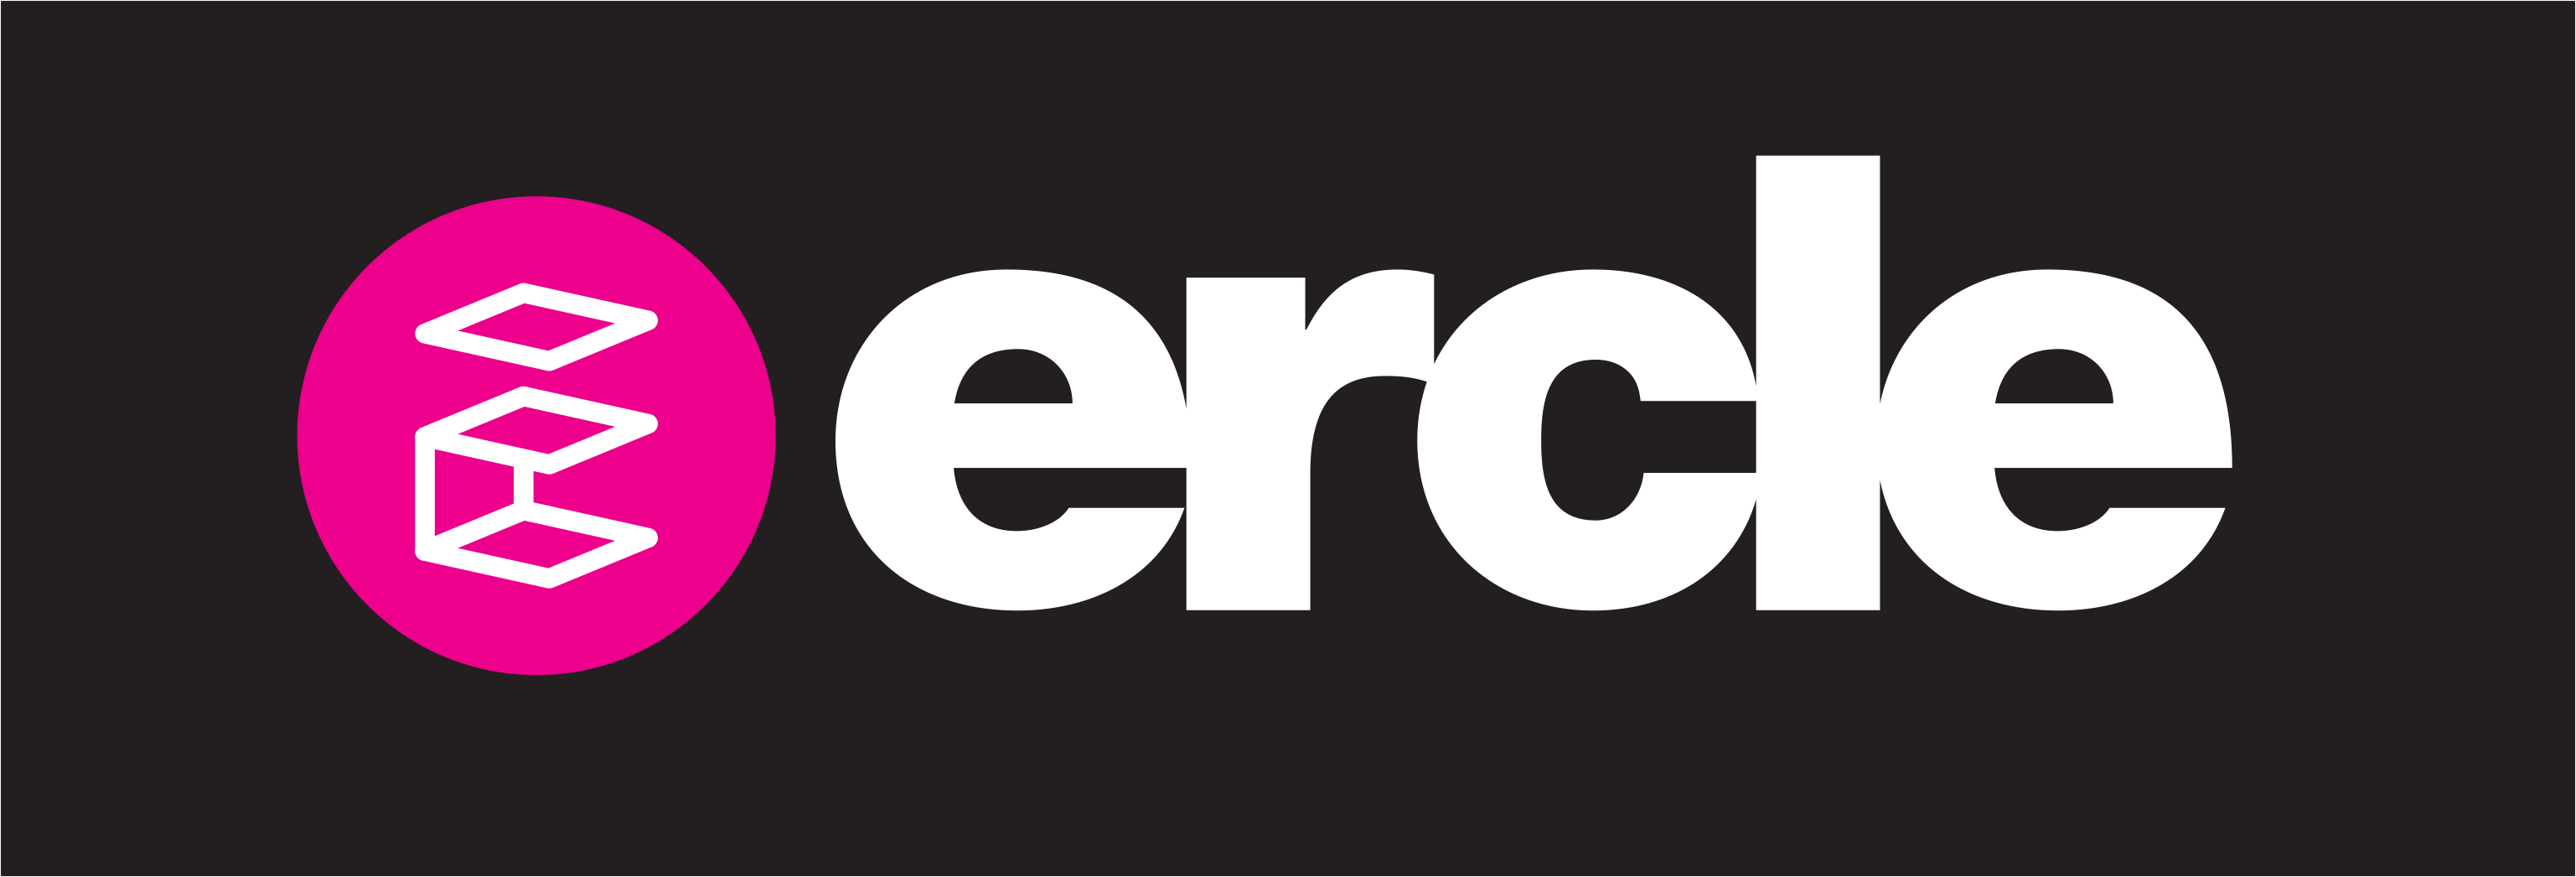 Ercle Architects